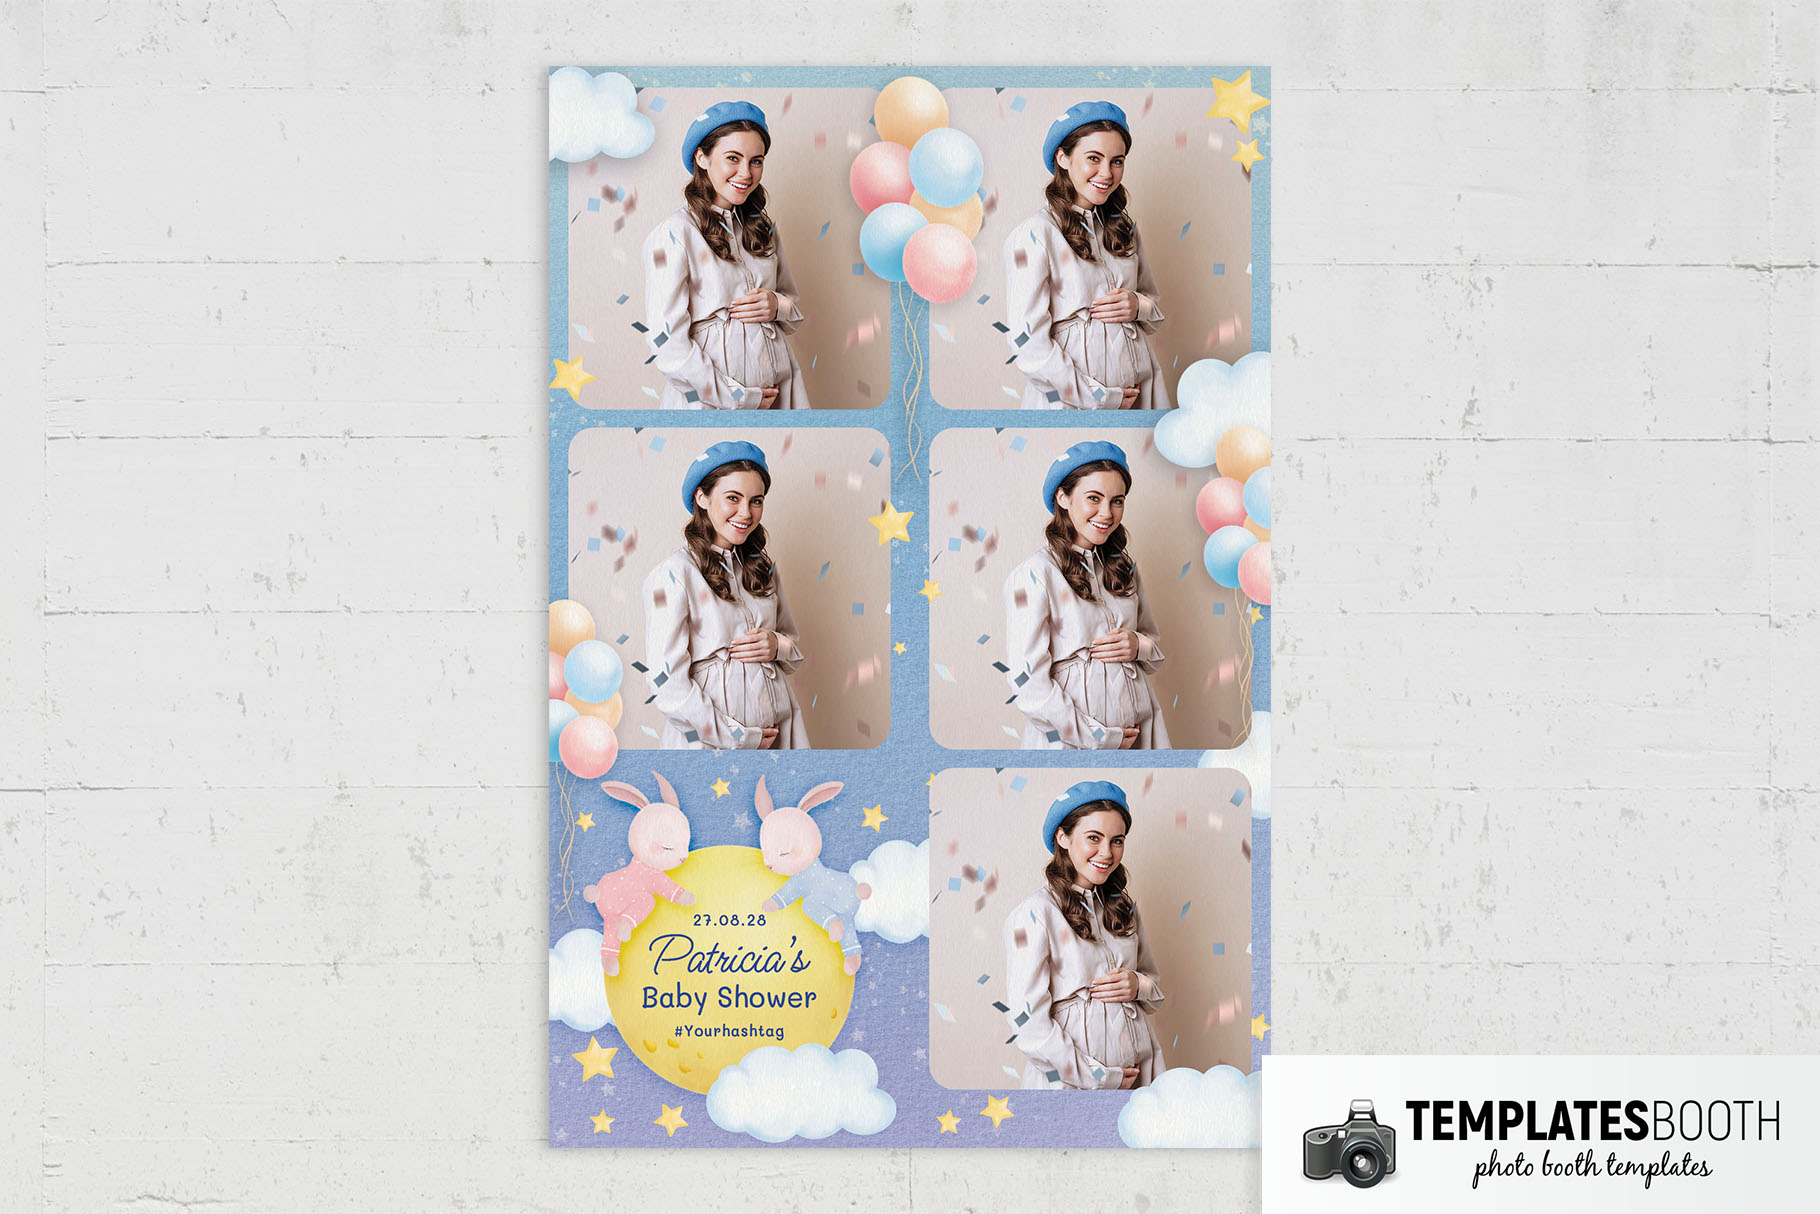 Baby Shower Party Photo booth Template